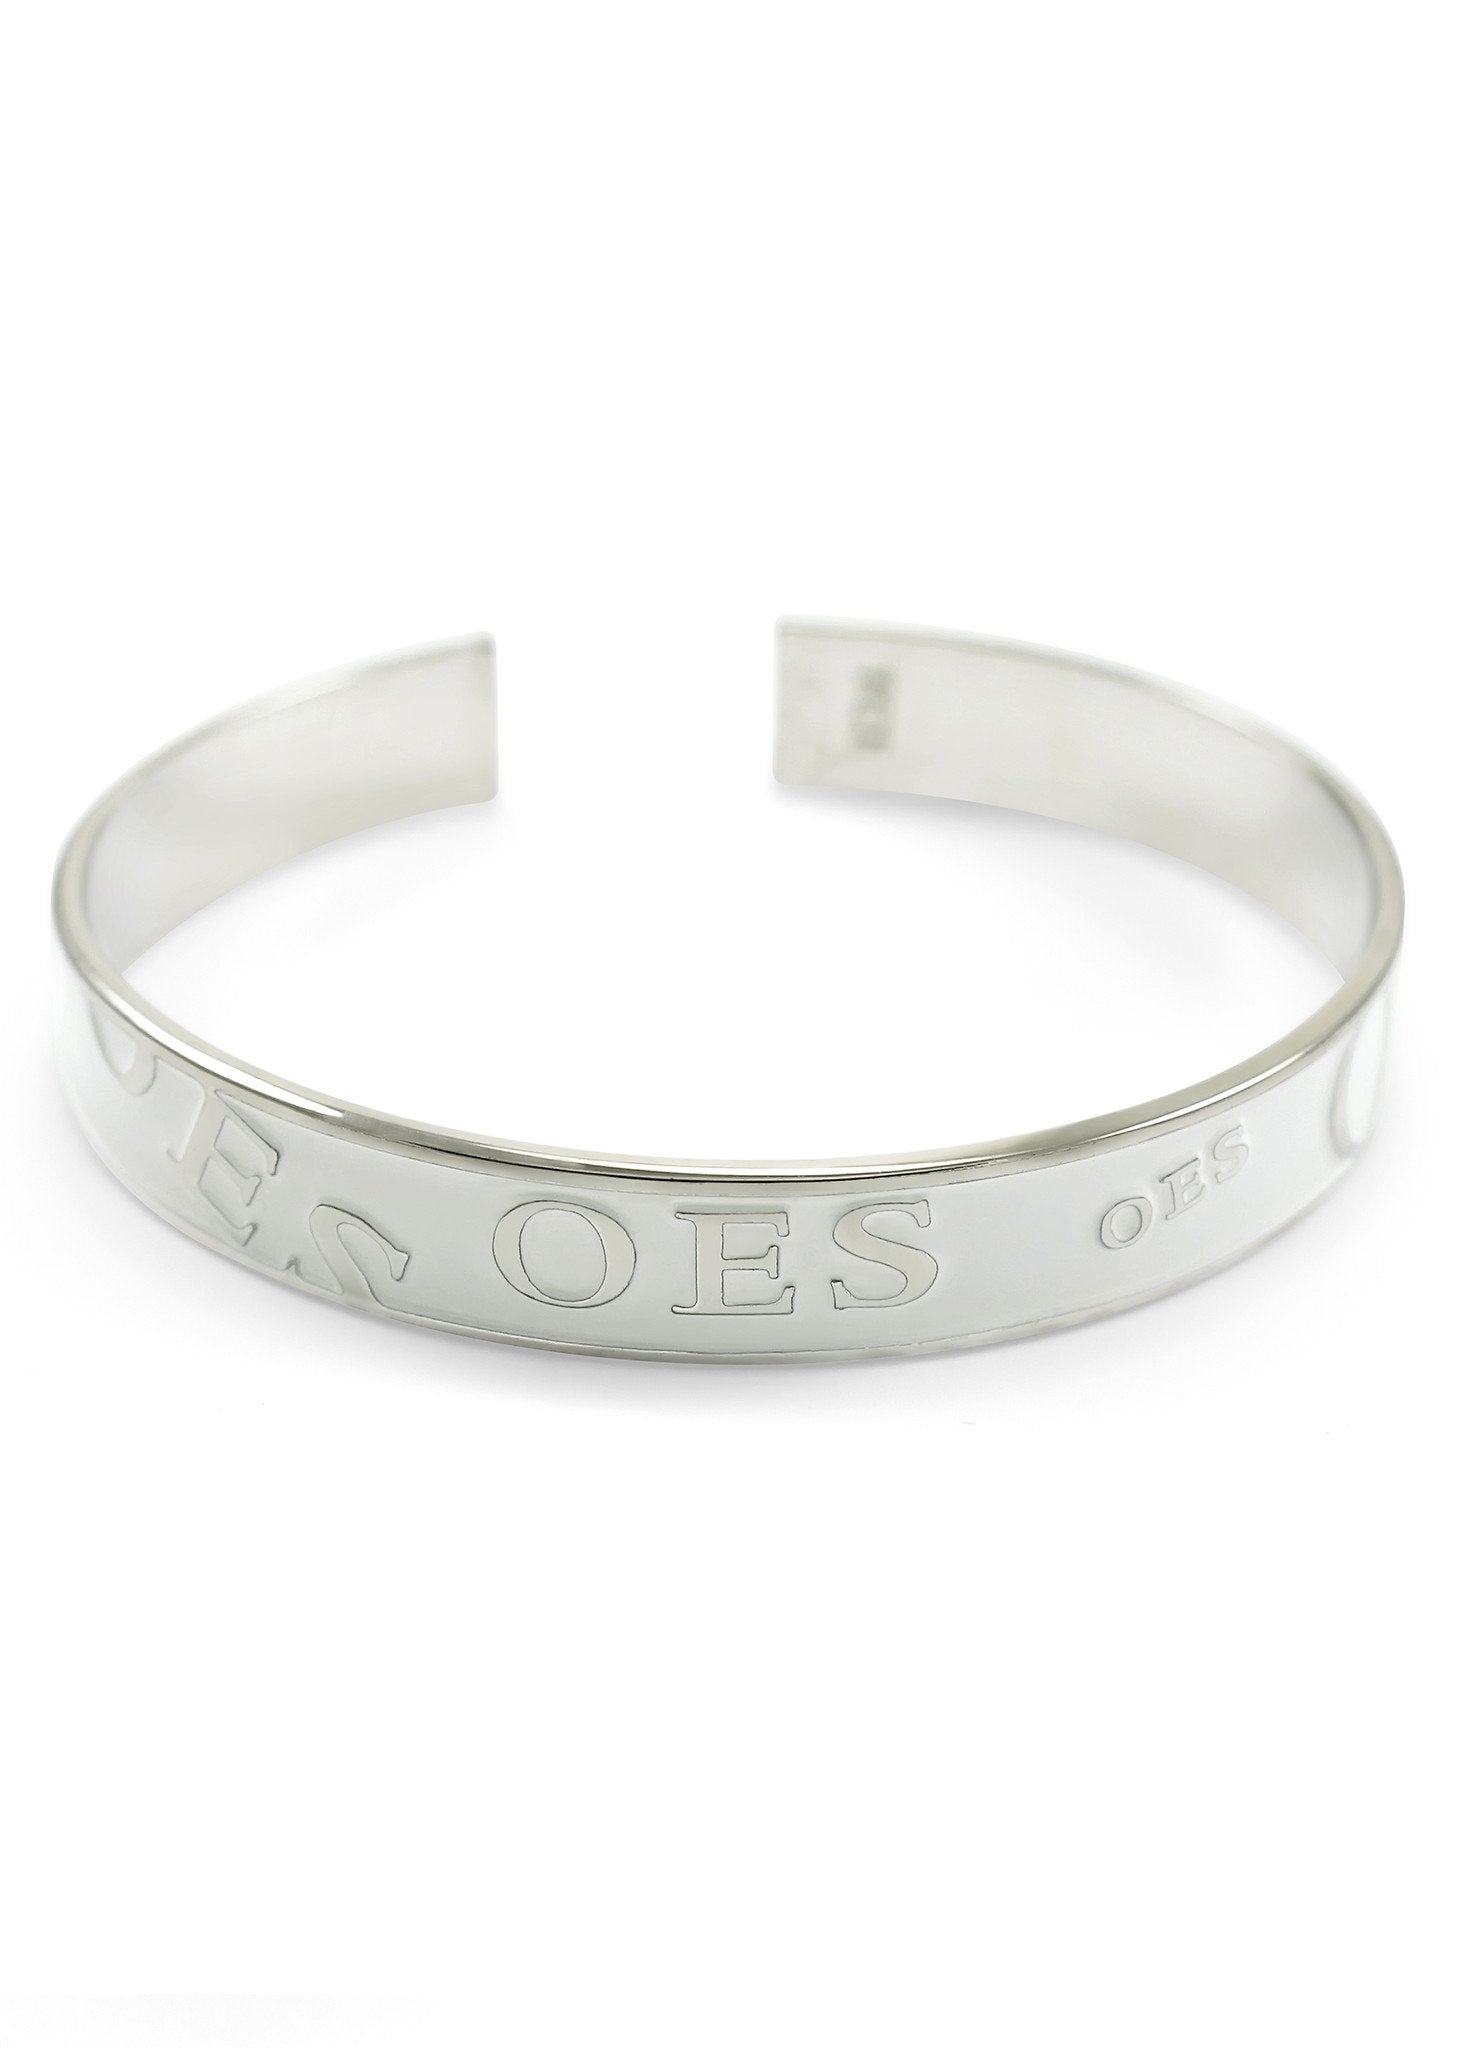 Order of the Eastern Star Jewelry | OES Paraphernalia - The Collegiate ...